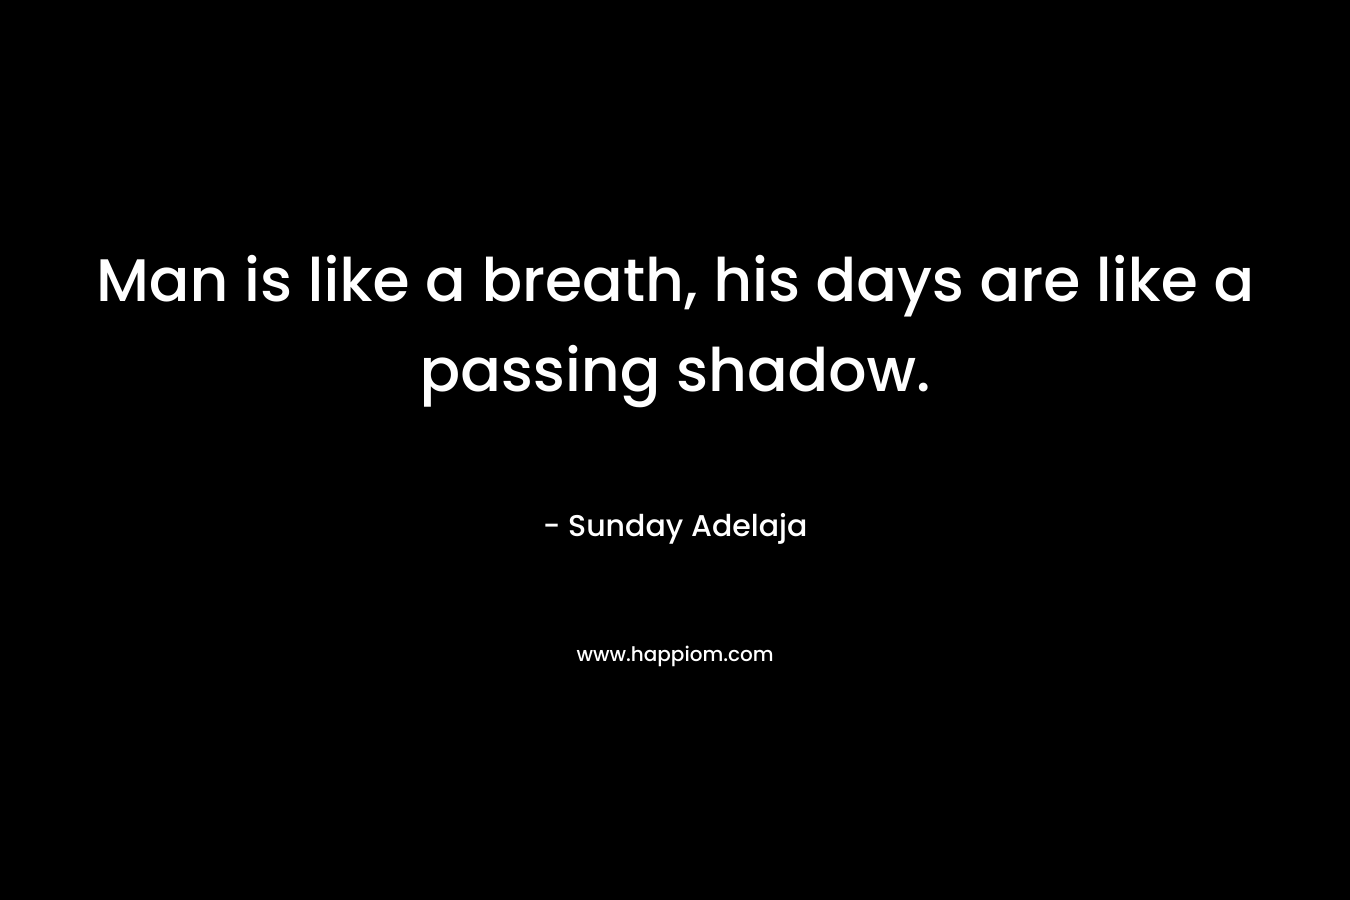 Man is like a breath, his days are like a passing shadow.